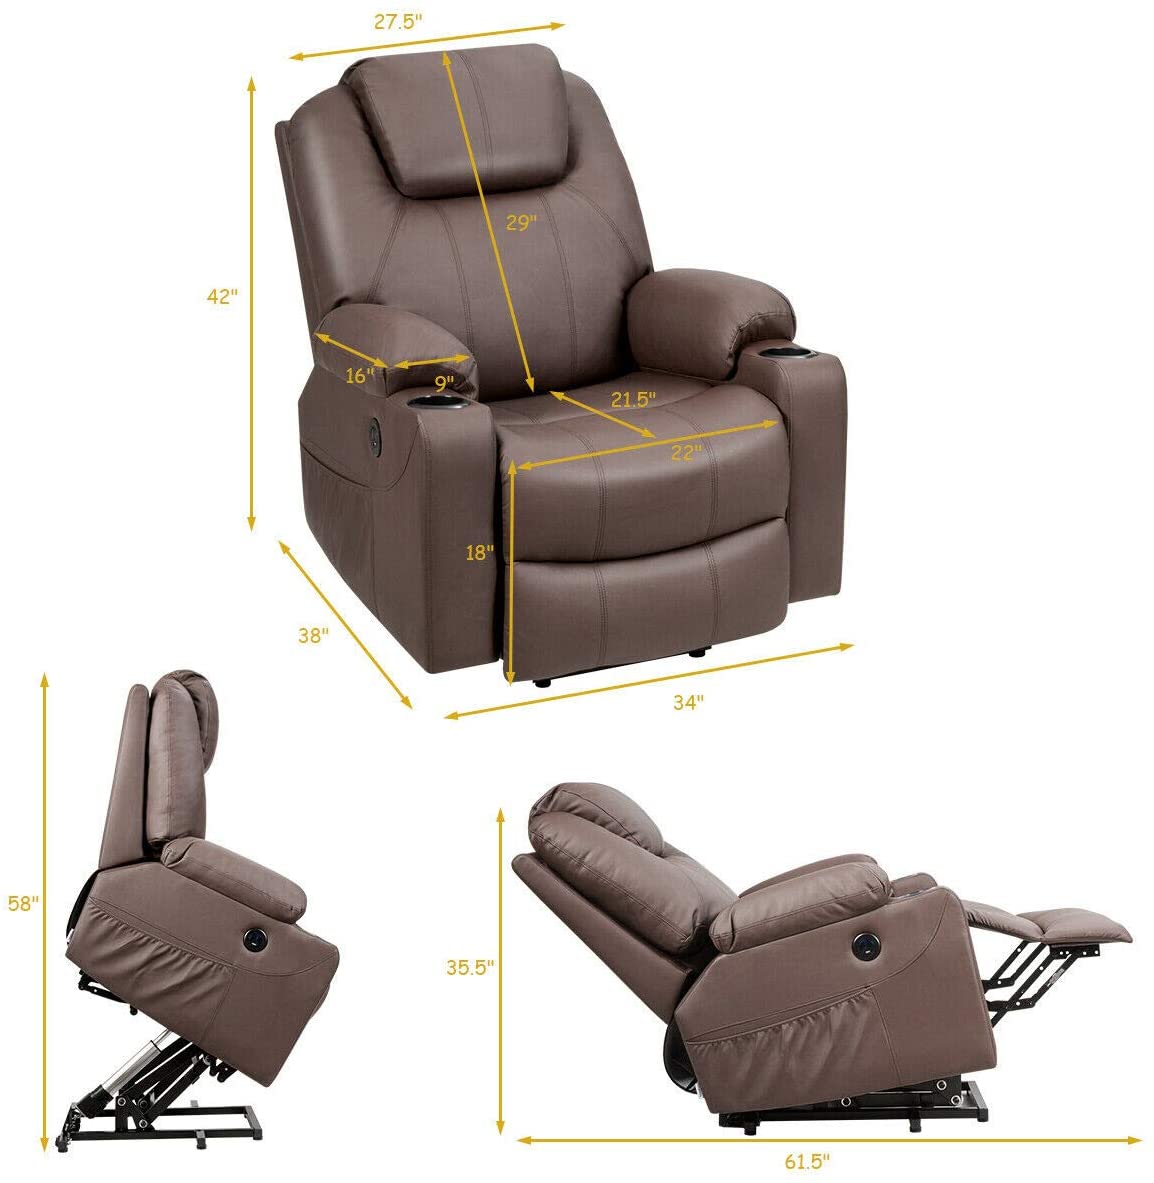 YONISEE Large Lift Chairs Recliner for Elderly - Dual Motor Power Lift Chair  Modern with Massage and Heat, Extended Footrest, 3 Positions, 2 Side  Pockets, and Cup Holders, USB Ports, Brown 